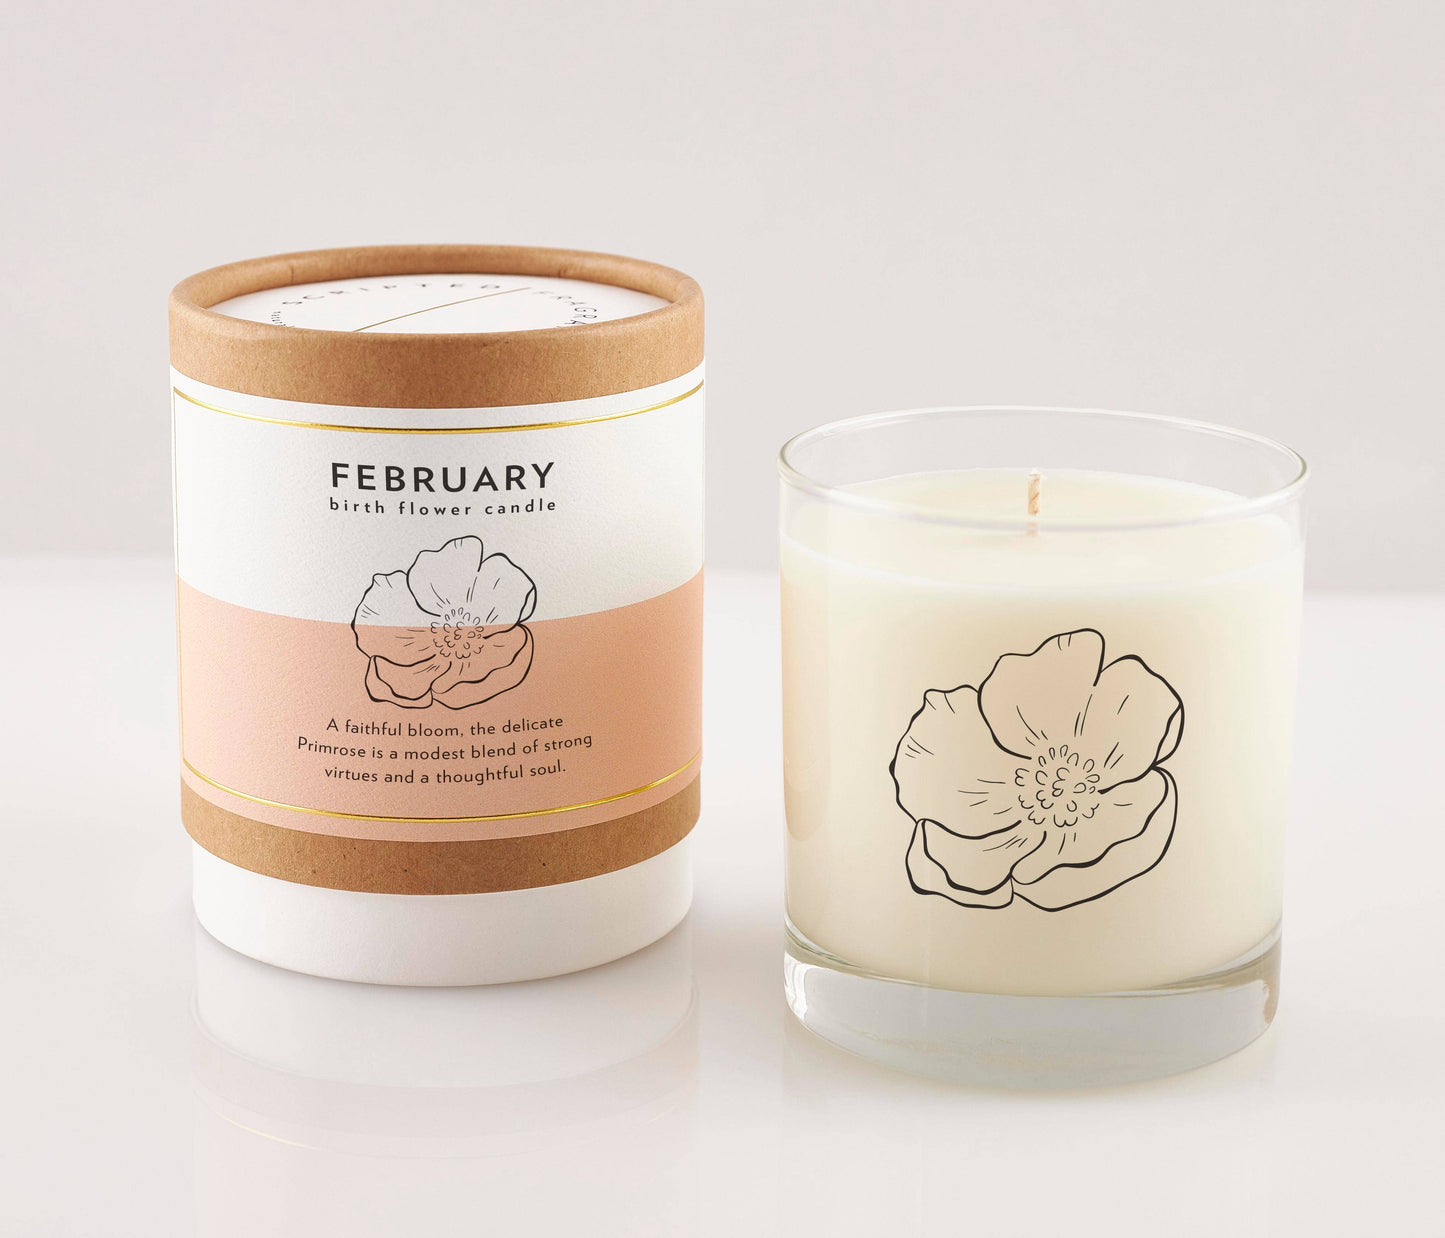 February Birth Flower Soy Candle in Reusable Rocks Glass